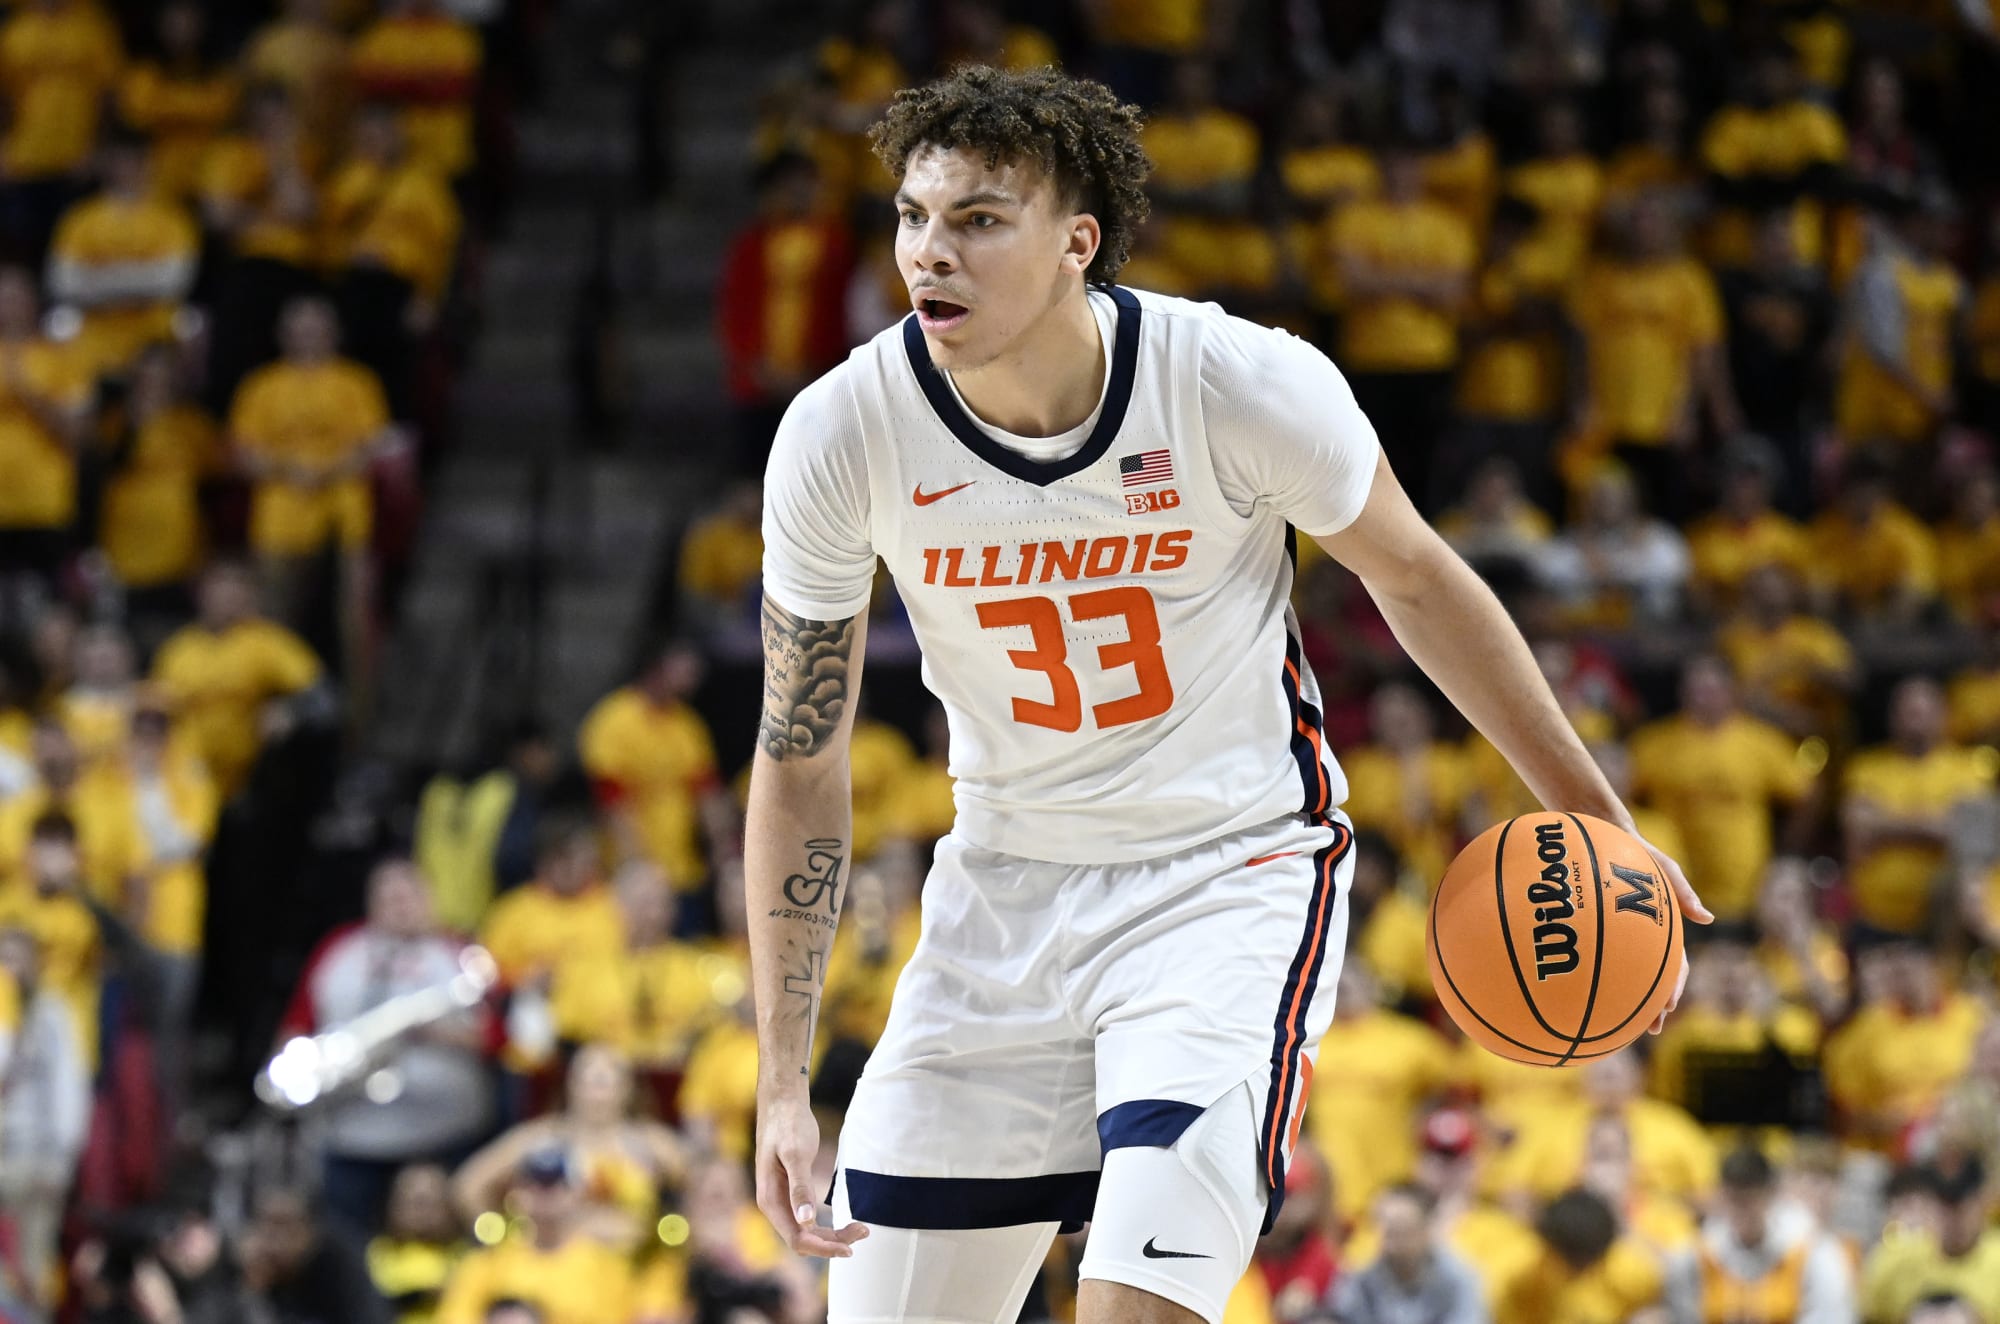 Illinois Basketball: Illini have a big opportunity to crash top 10 in AP Poll